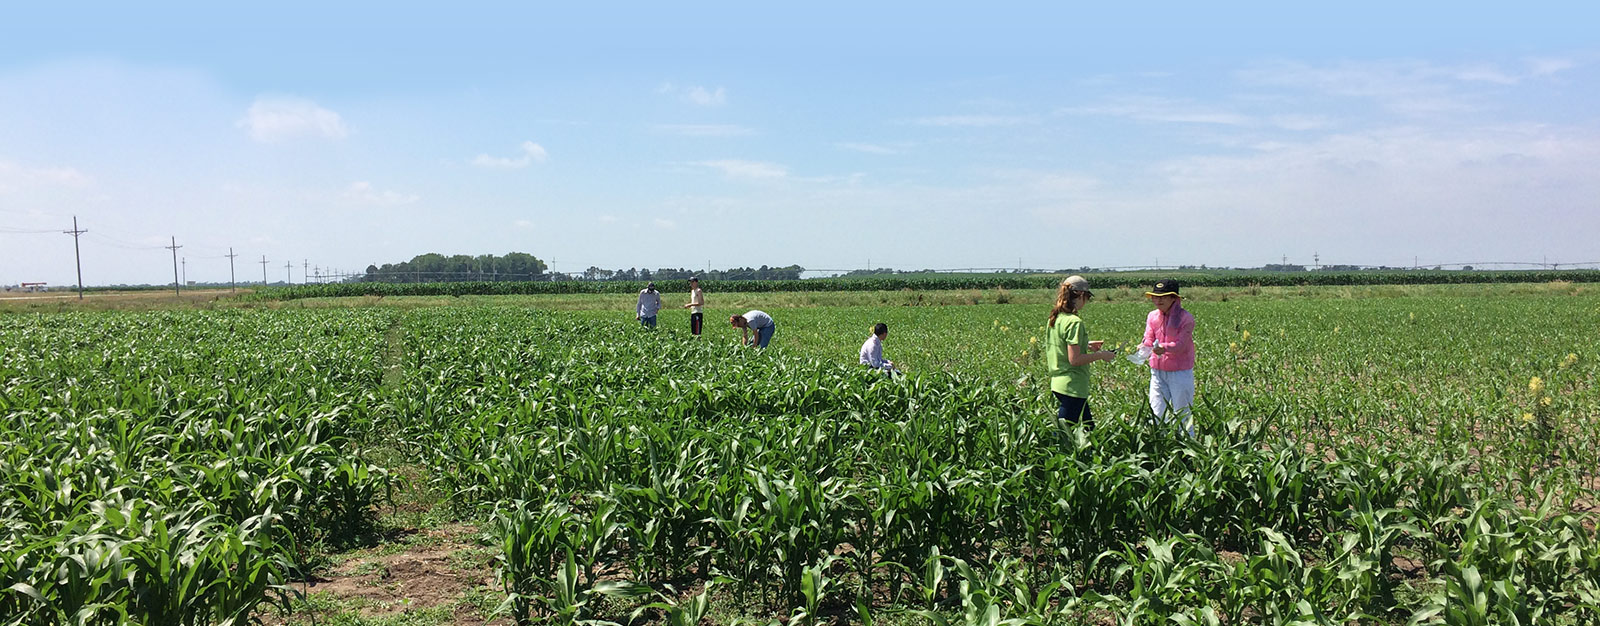 Students and faculty in the field